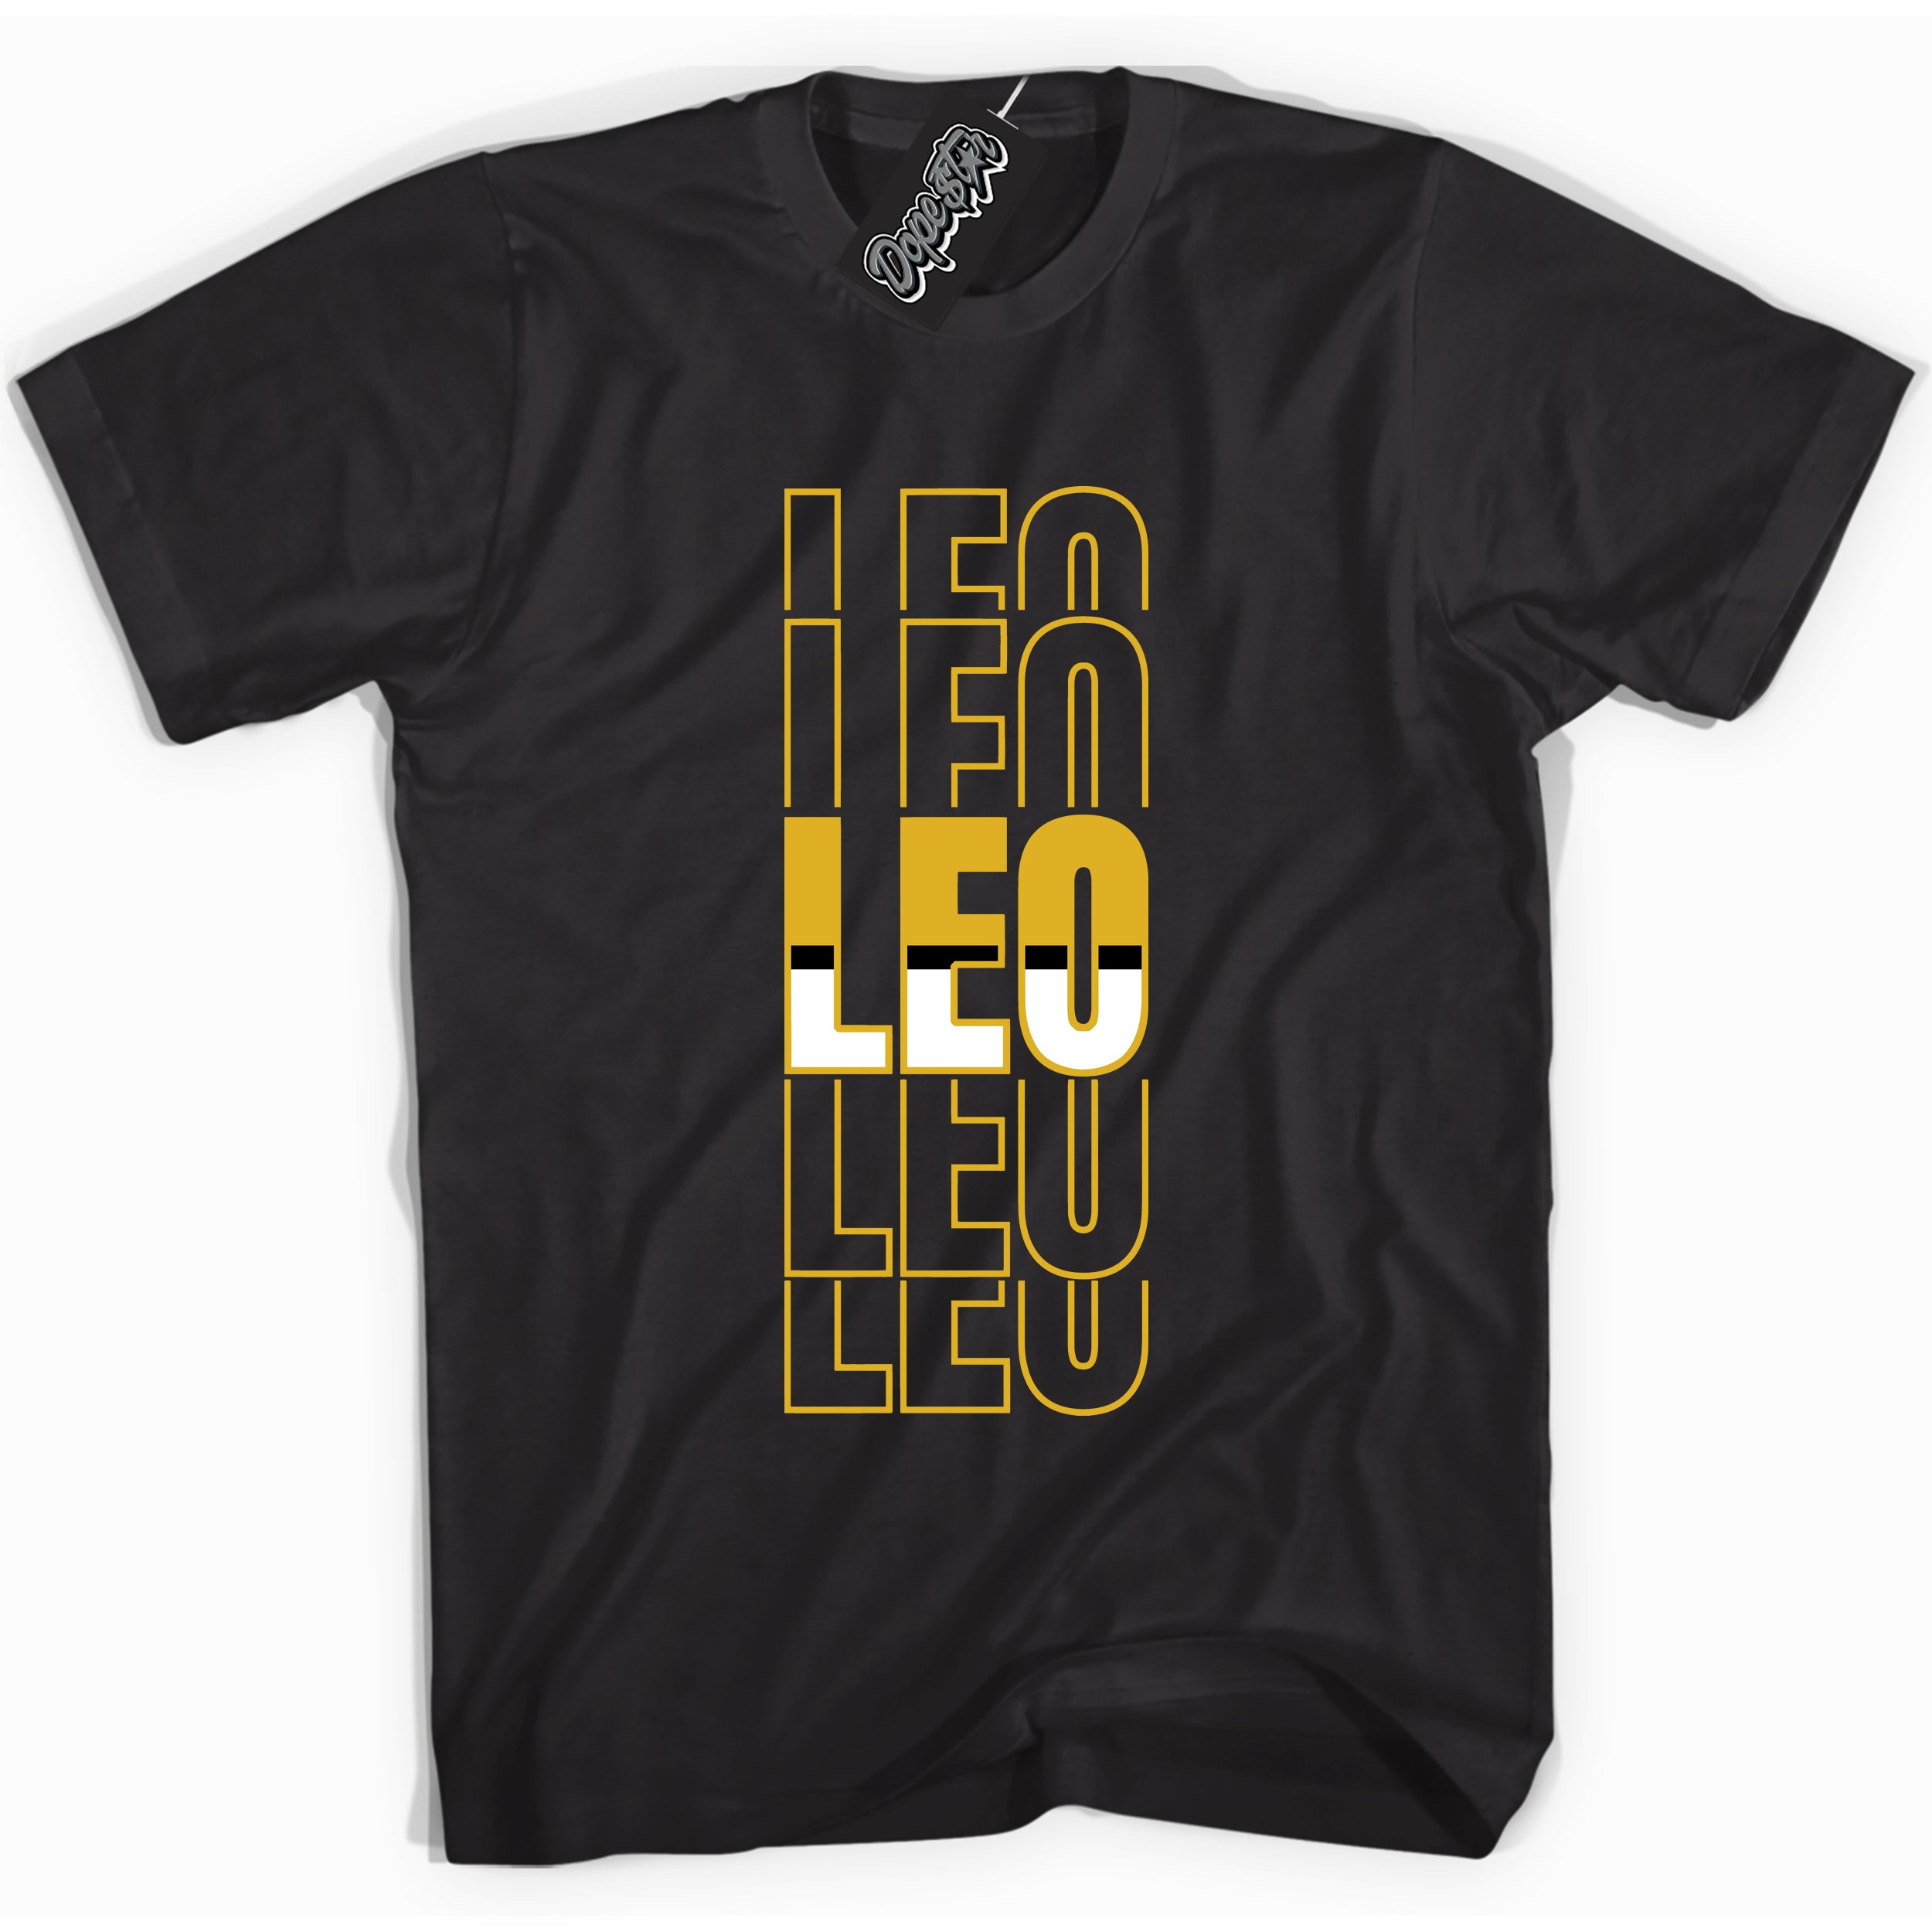 Cool Black Shirt with “ Leo ” design that perfectly matches Yellow Ochre 6s Sneakers.